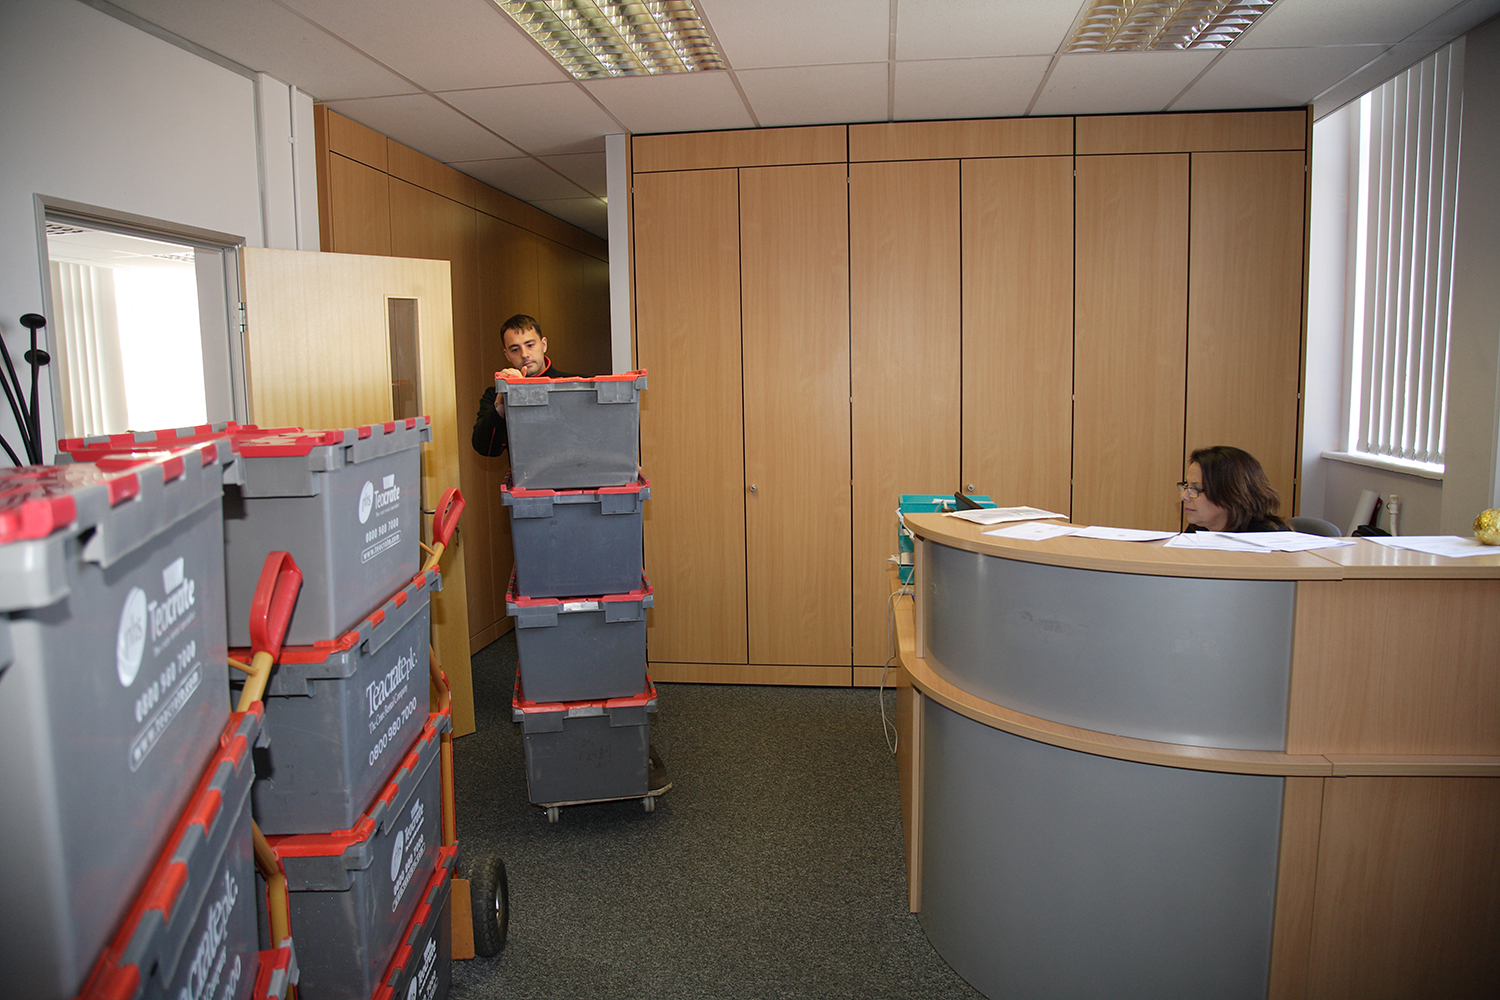 London office business removal service